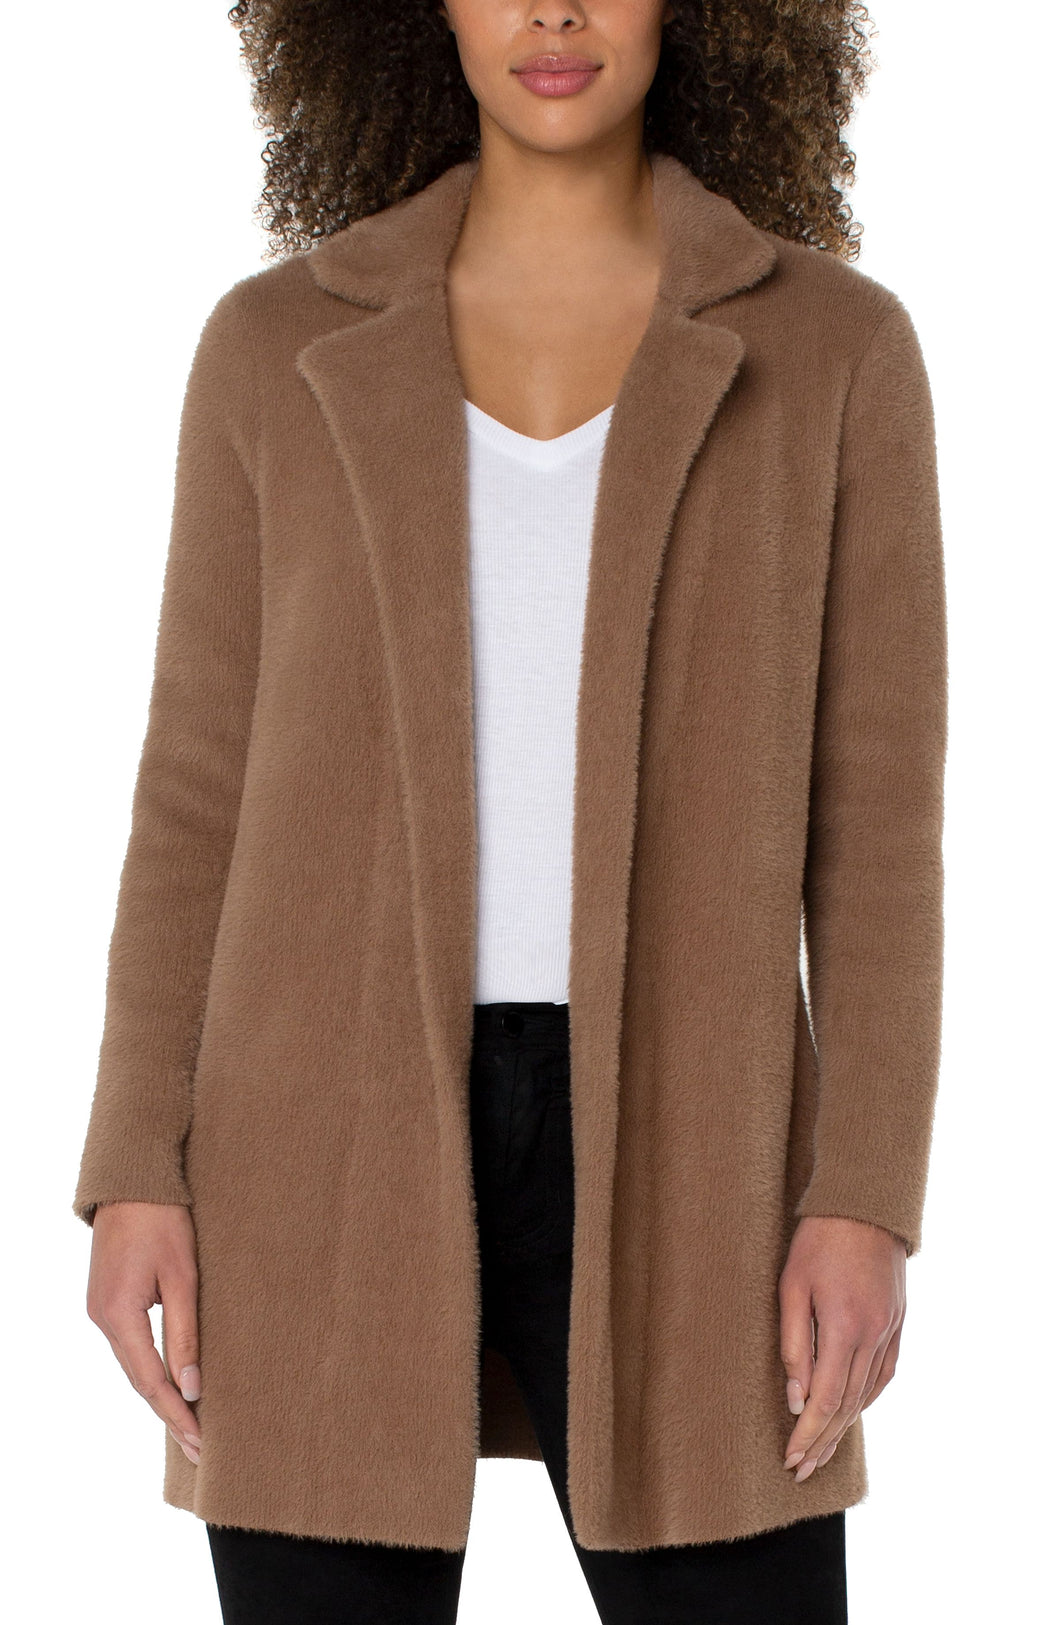 A beautiful combination of a cardigan and a coat creates a coatigan that is warm enough to wear during those cold nights but comfortable enough to wear indoors. Soft and fuzzy, you will wrap yourself in comfort each time you put on this fabulous coatigan. Featuring a beautiful camel color, this coatigan pairs well with denim, trousers or leggings! 